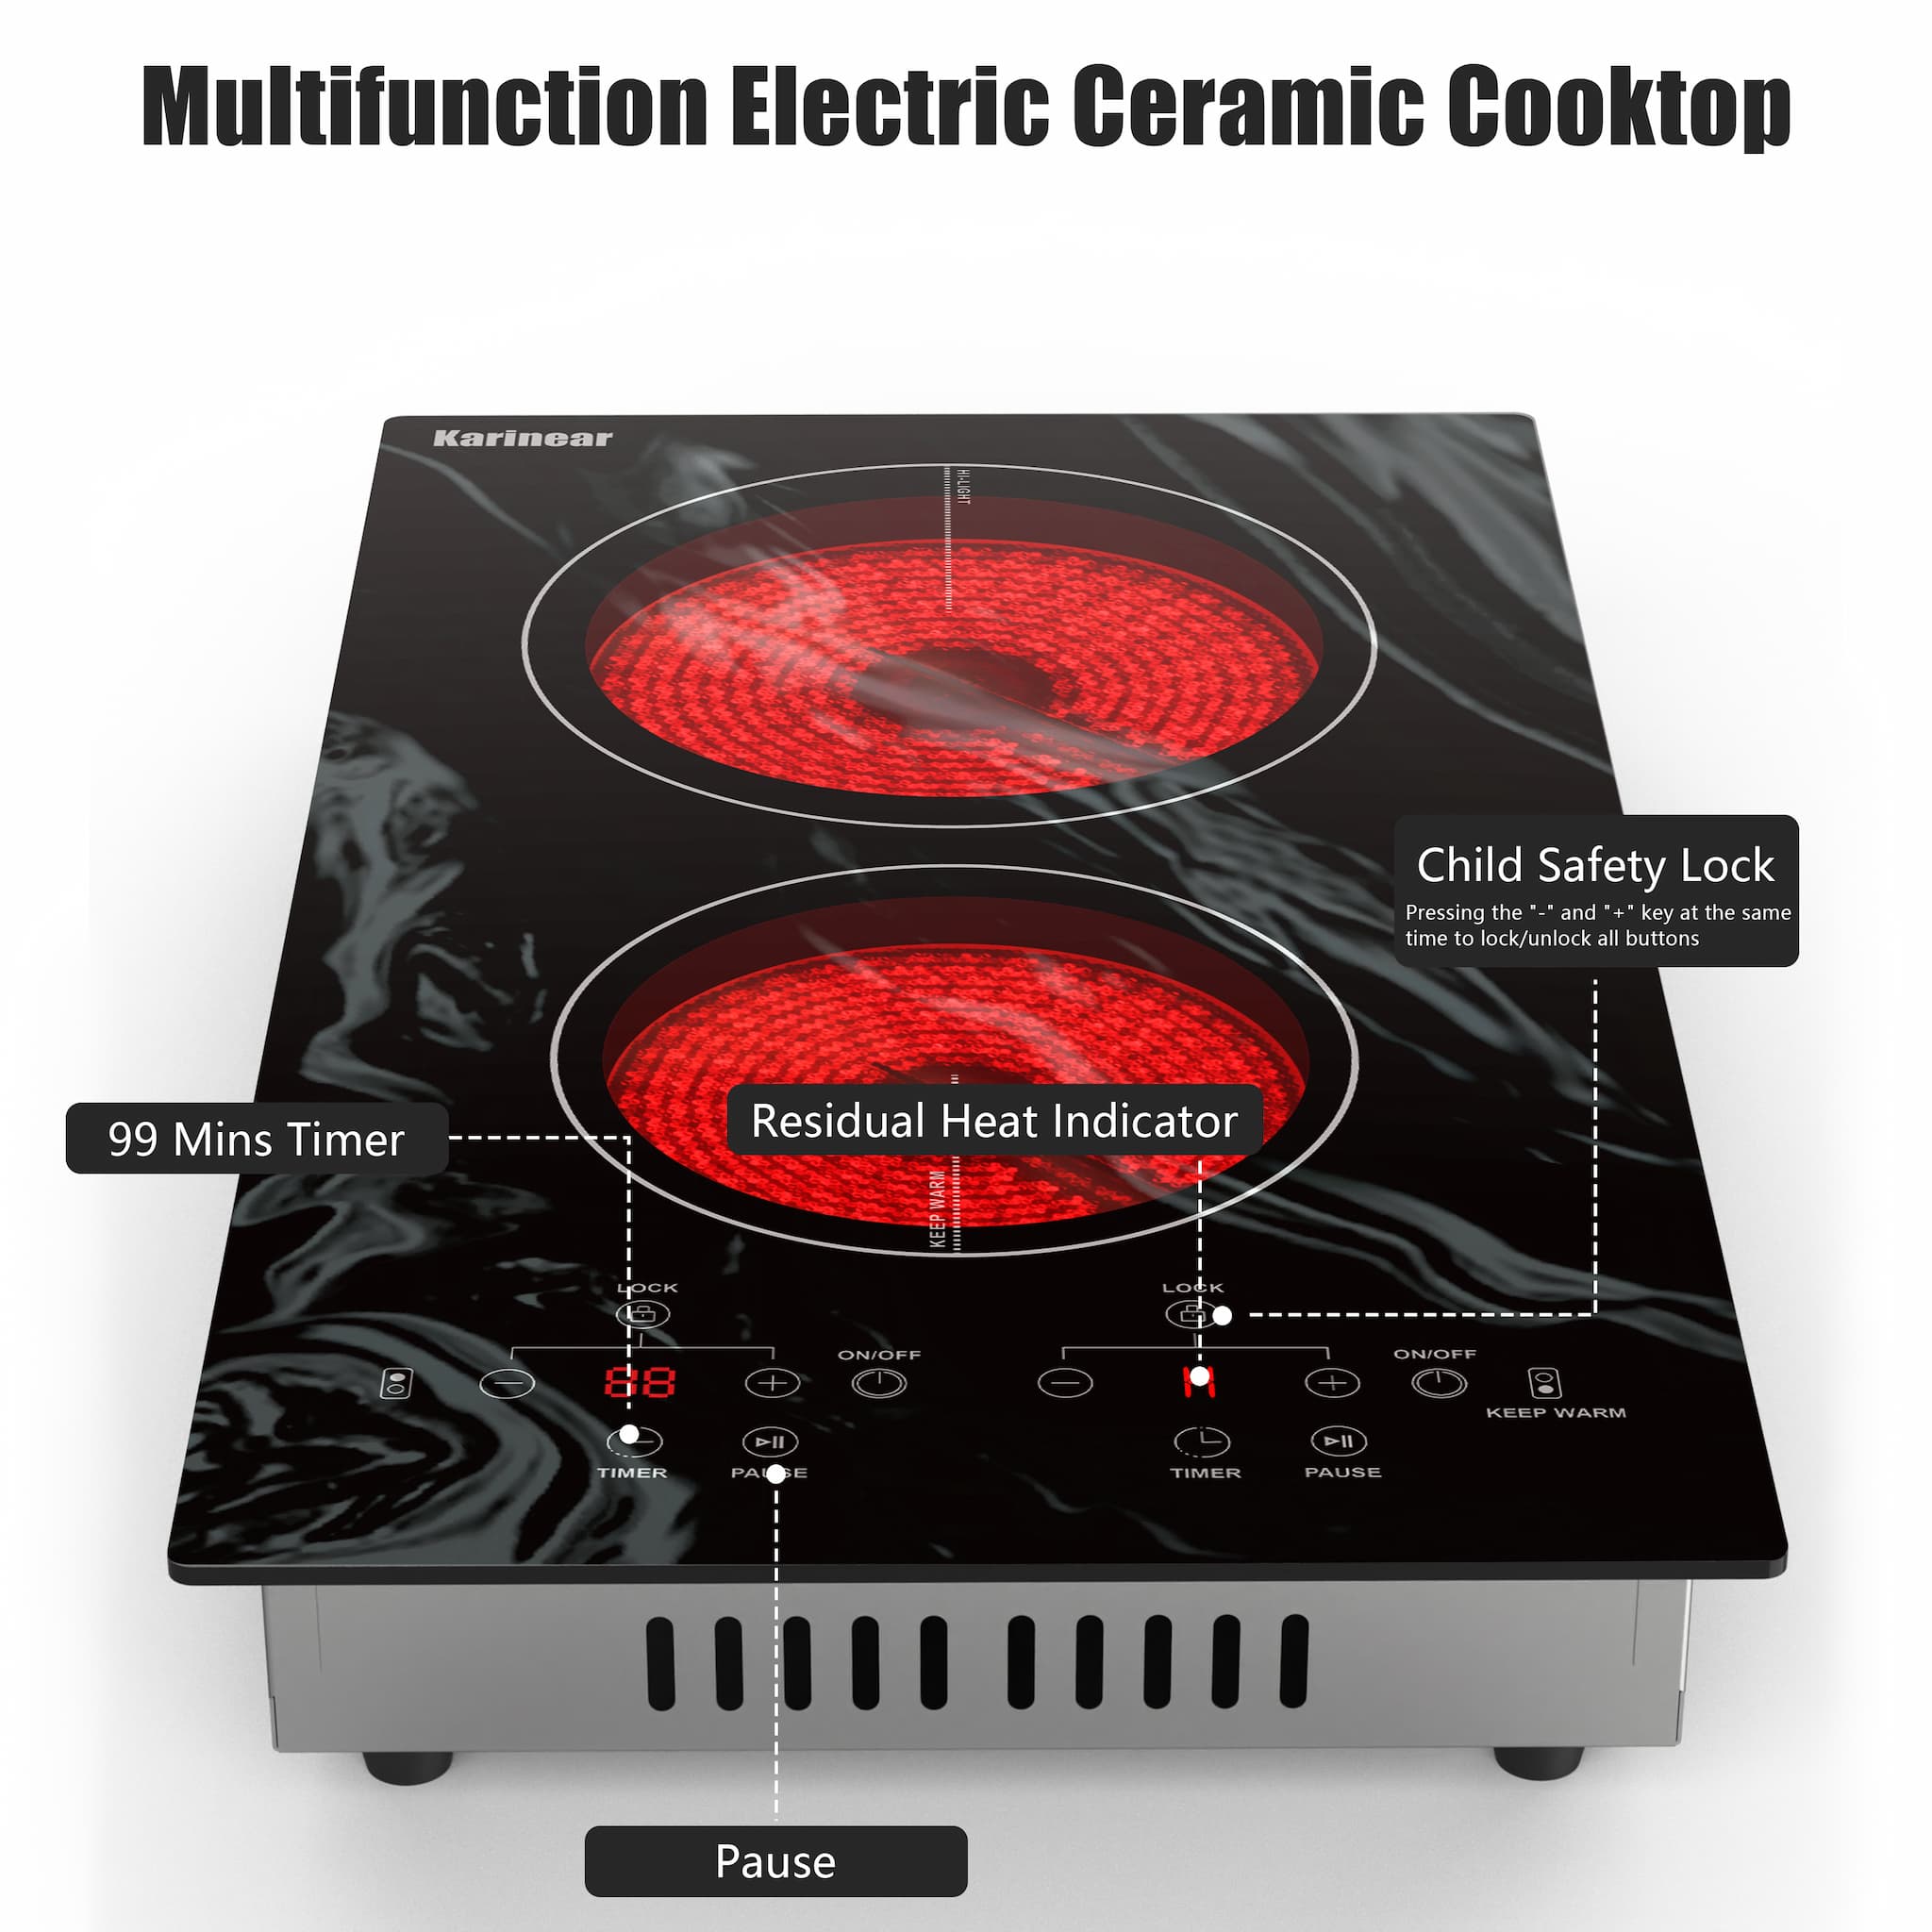 best electric cooktop with Press and hold + and - at the same time for 3 seconds and it will activate or unlock the child safety lock.